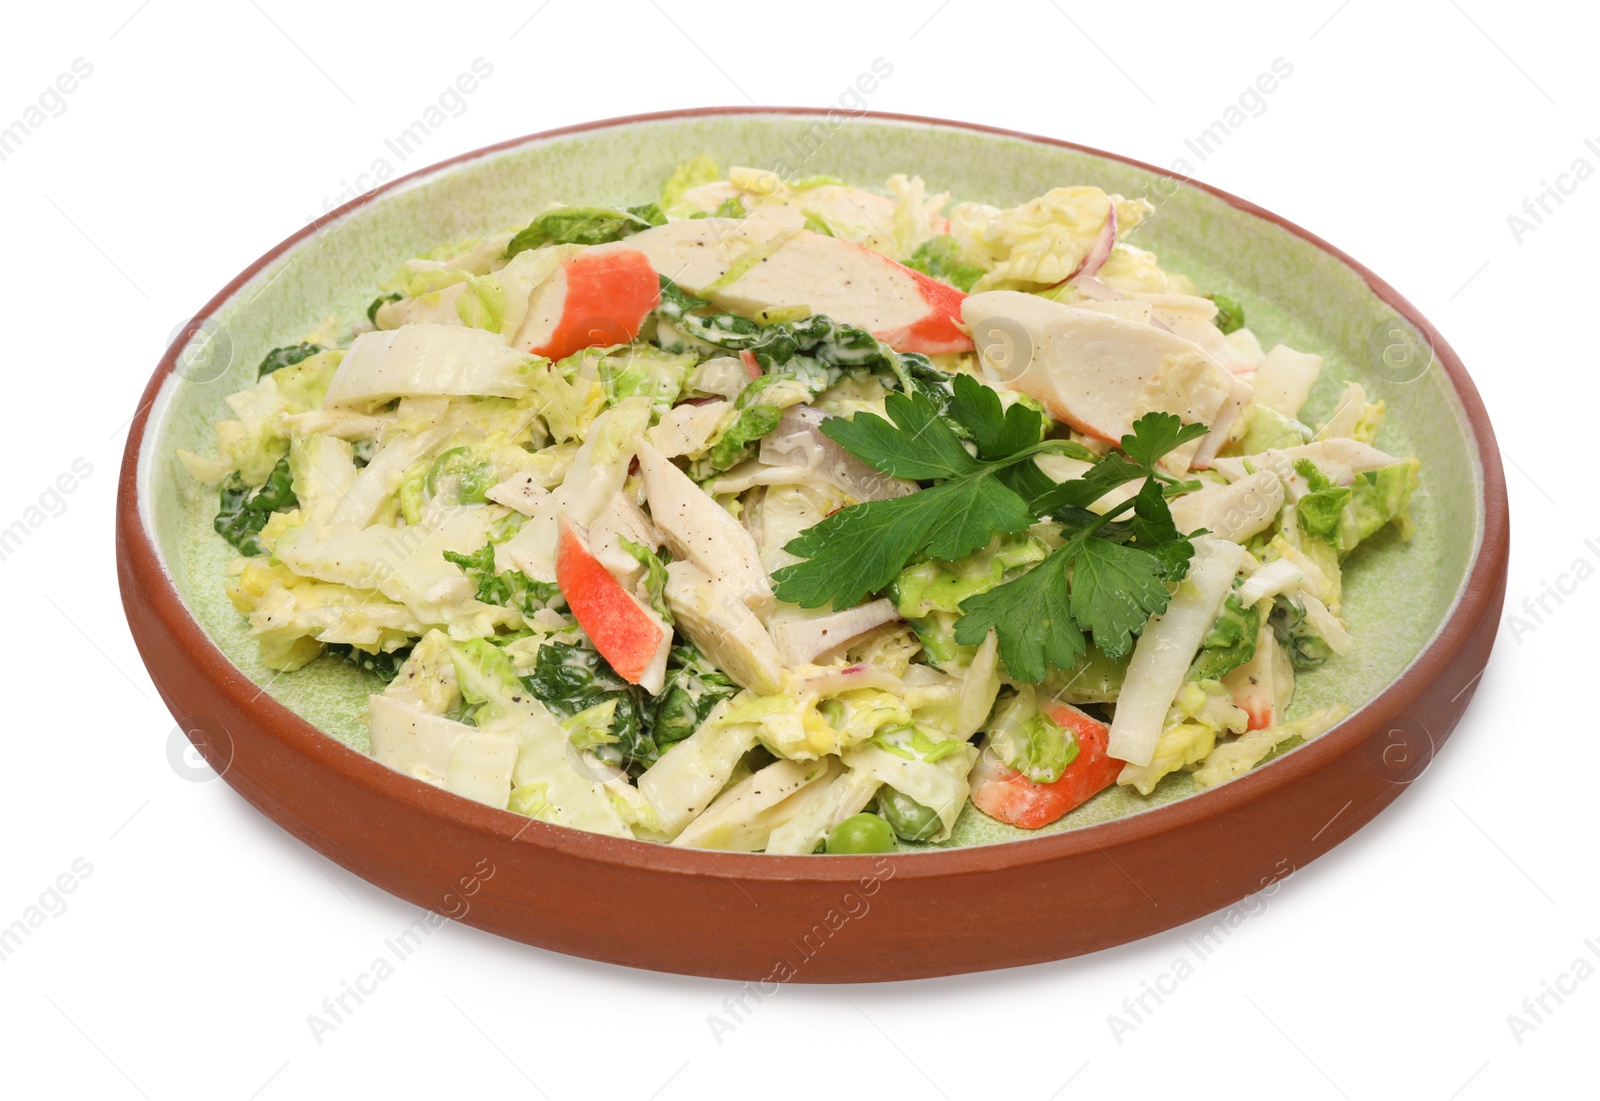 Photo of Delicious salad with Chinese cabbage, crab sticks and parsley isolated on white